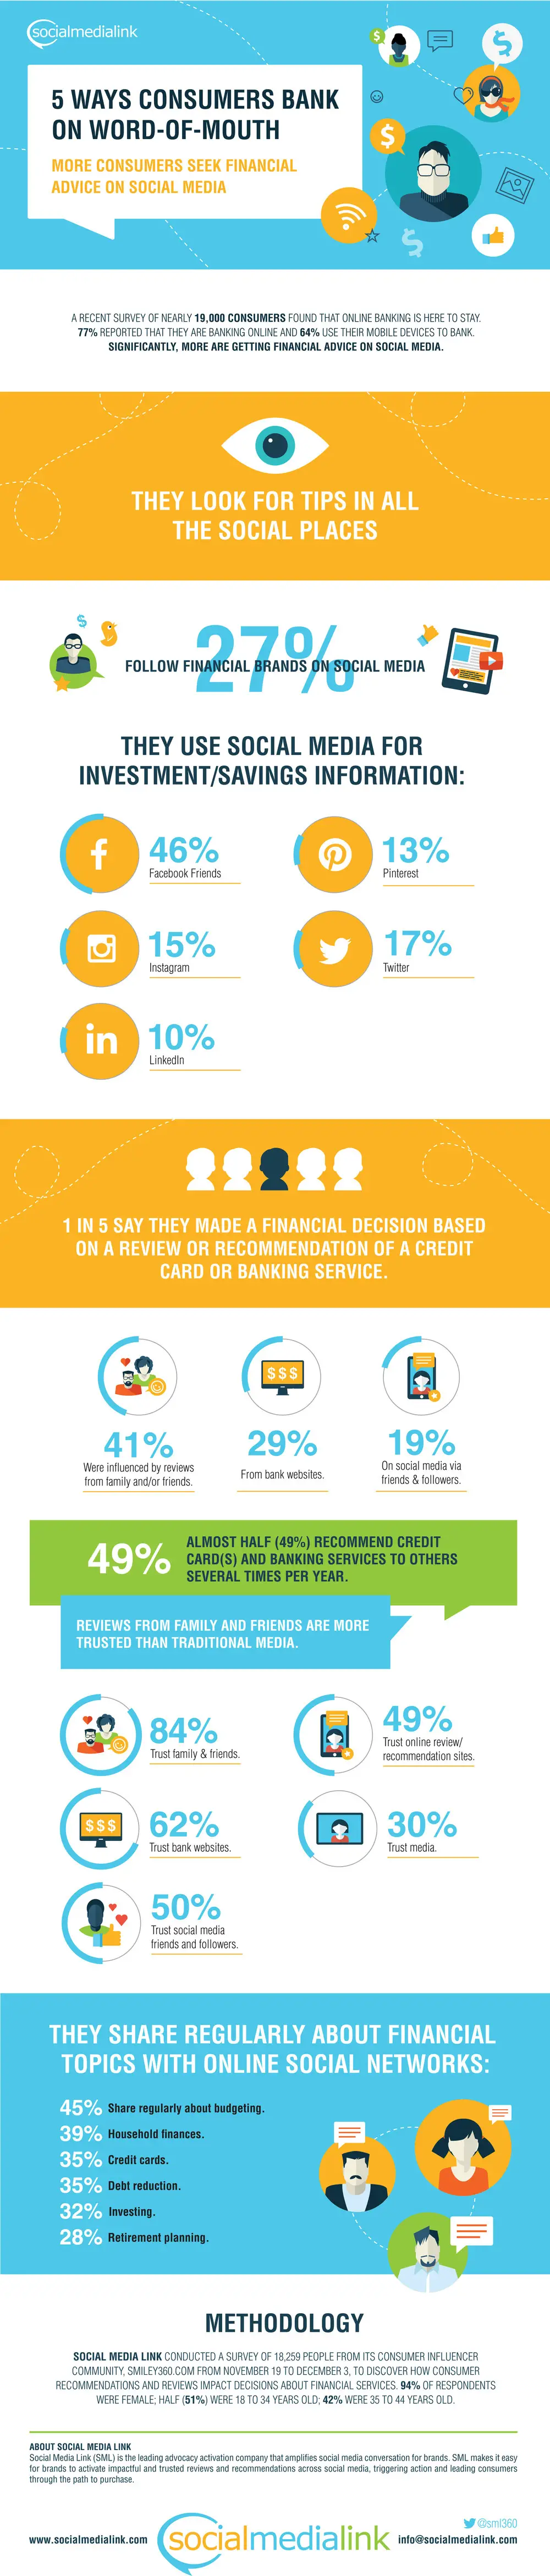 wersm-five-ways-consumers-bank-on-word-of-mouth-infographic